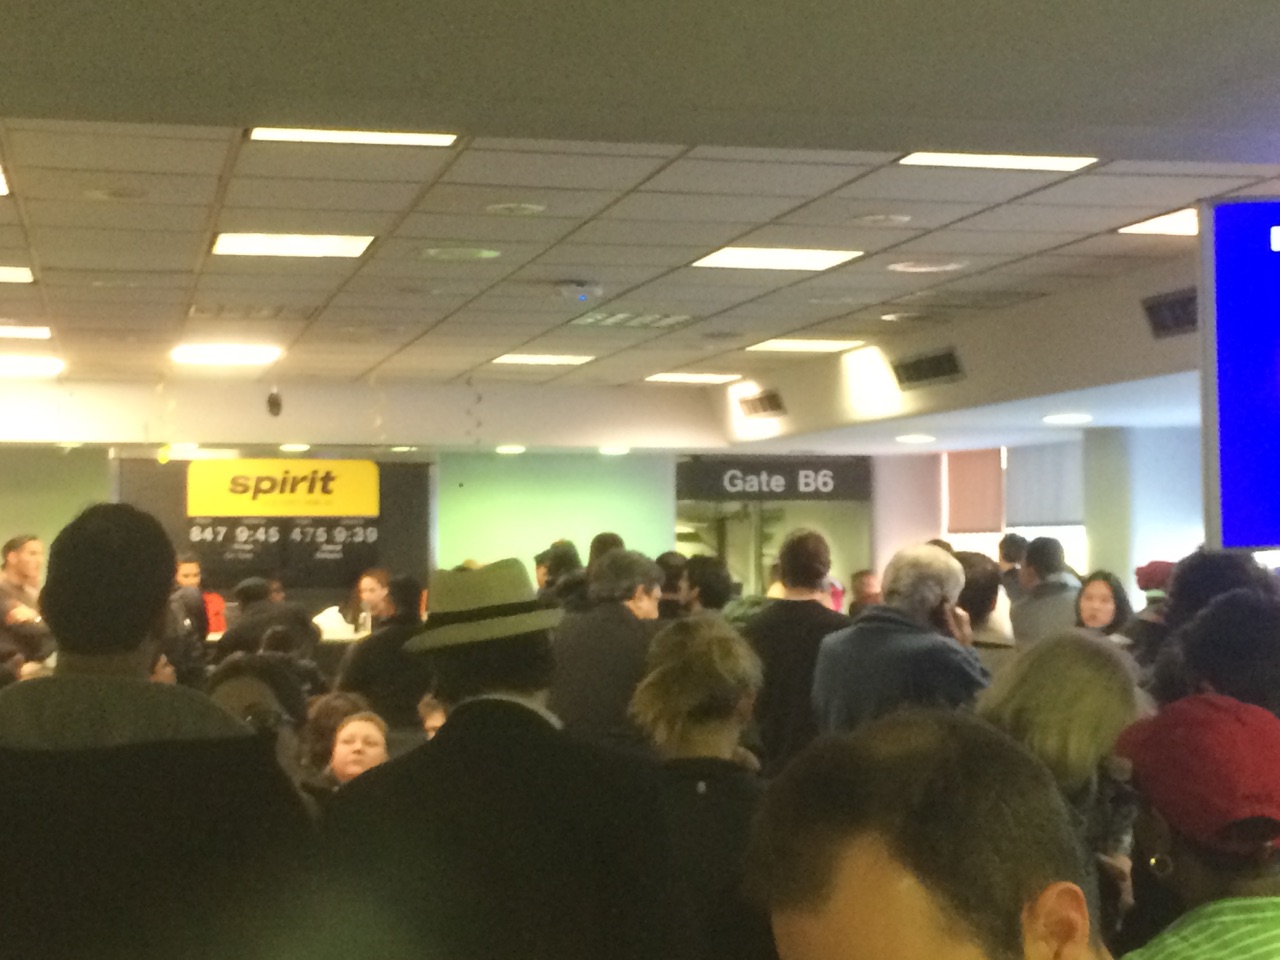 A crowded gate at LaGuardia Airport after passengers were evacuated from a Spirit Airlines flight on Dec. 26, 2015 (credit: Zach Staggers)